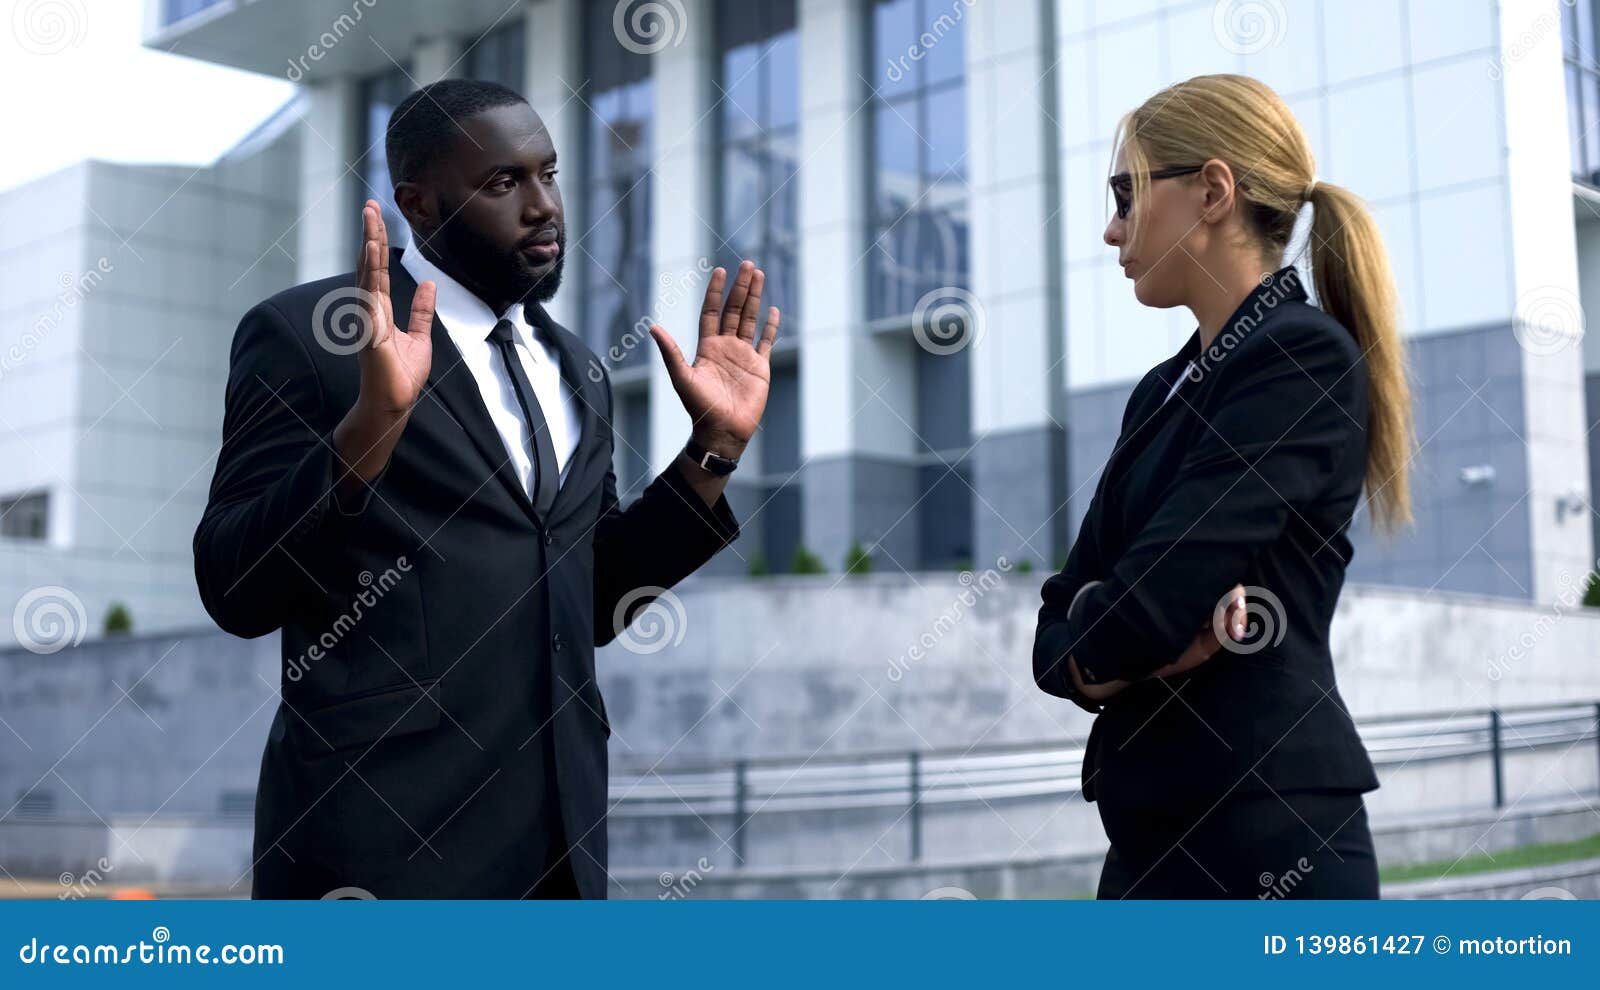 female boss offending afro-american employee, man trying to justify his doings